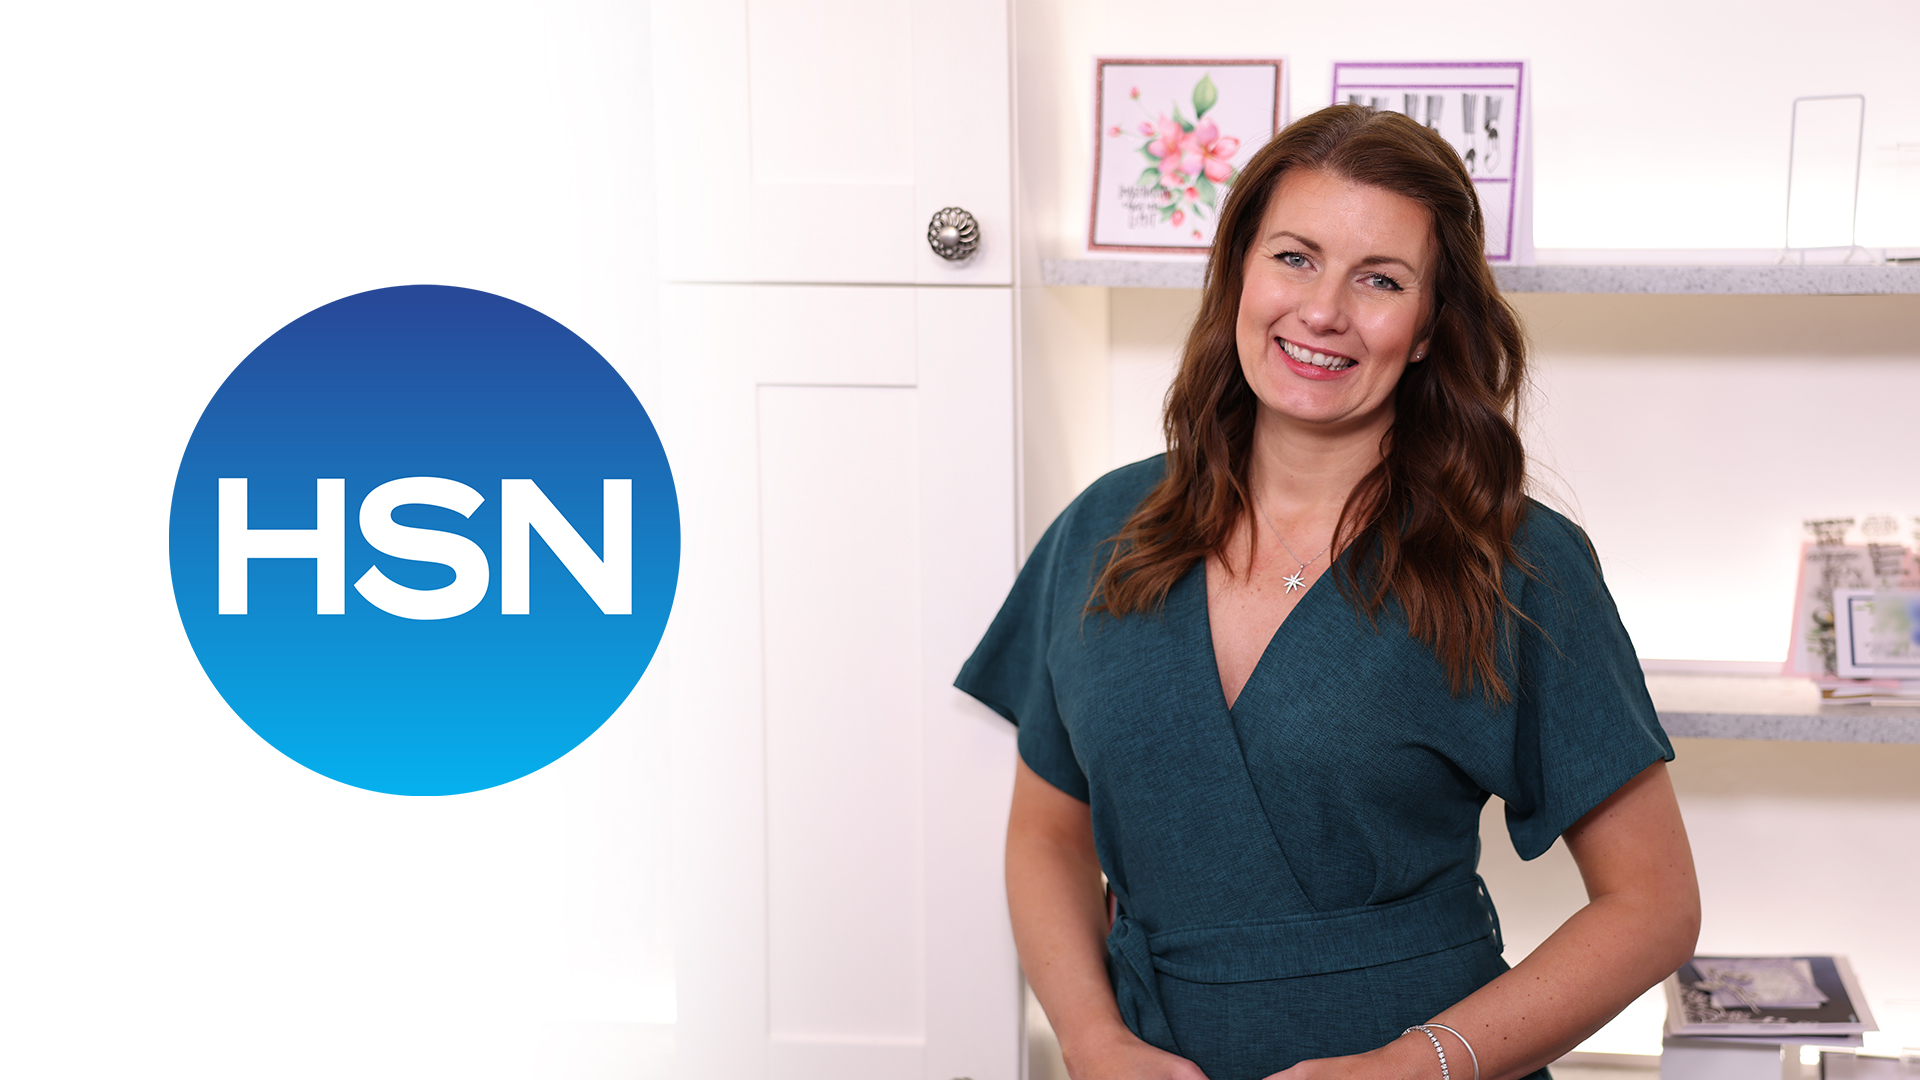 hsn-show-may-3rd---toni-is-joined-by-valerie-stup-for-the-latest-stamps-by-me-product-launch